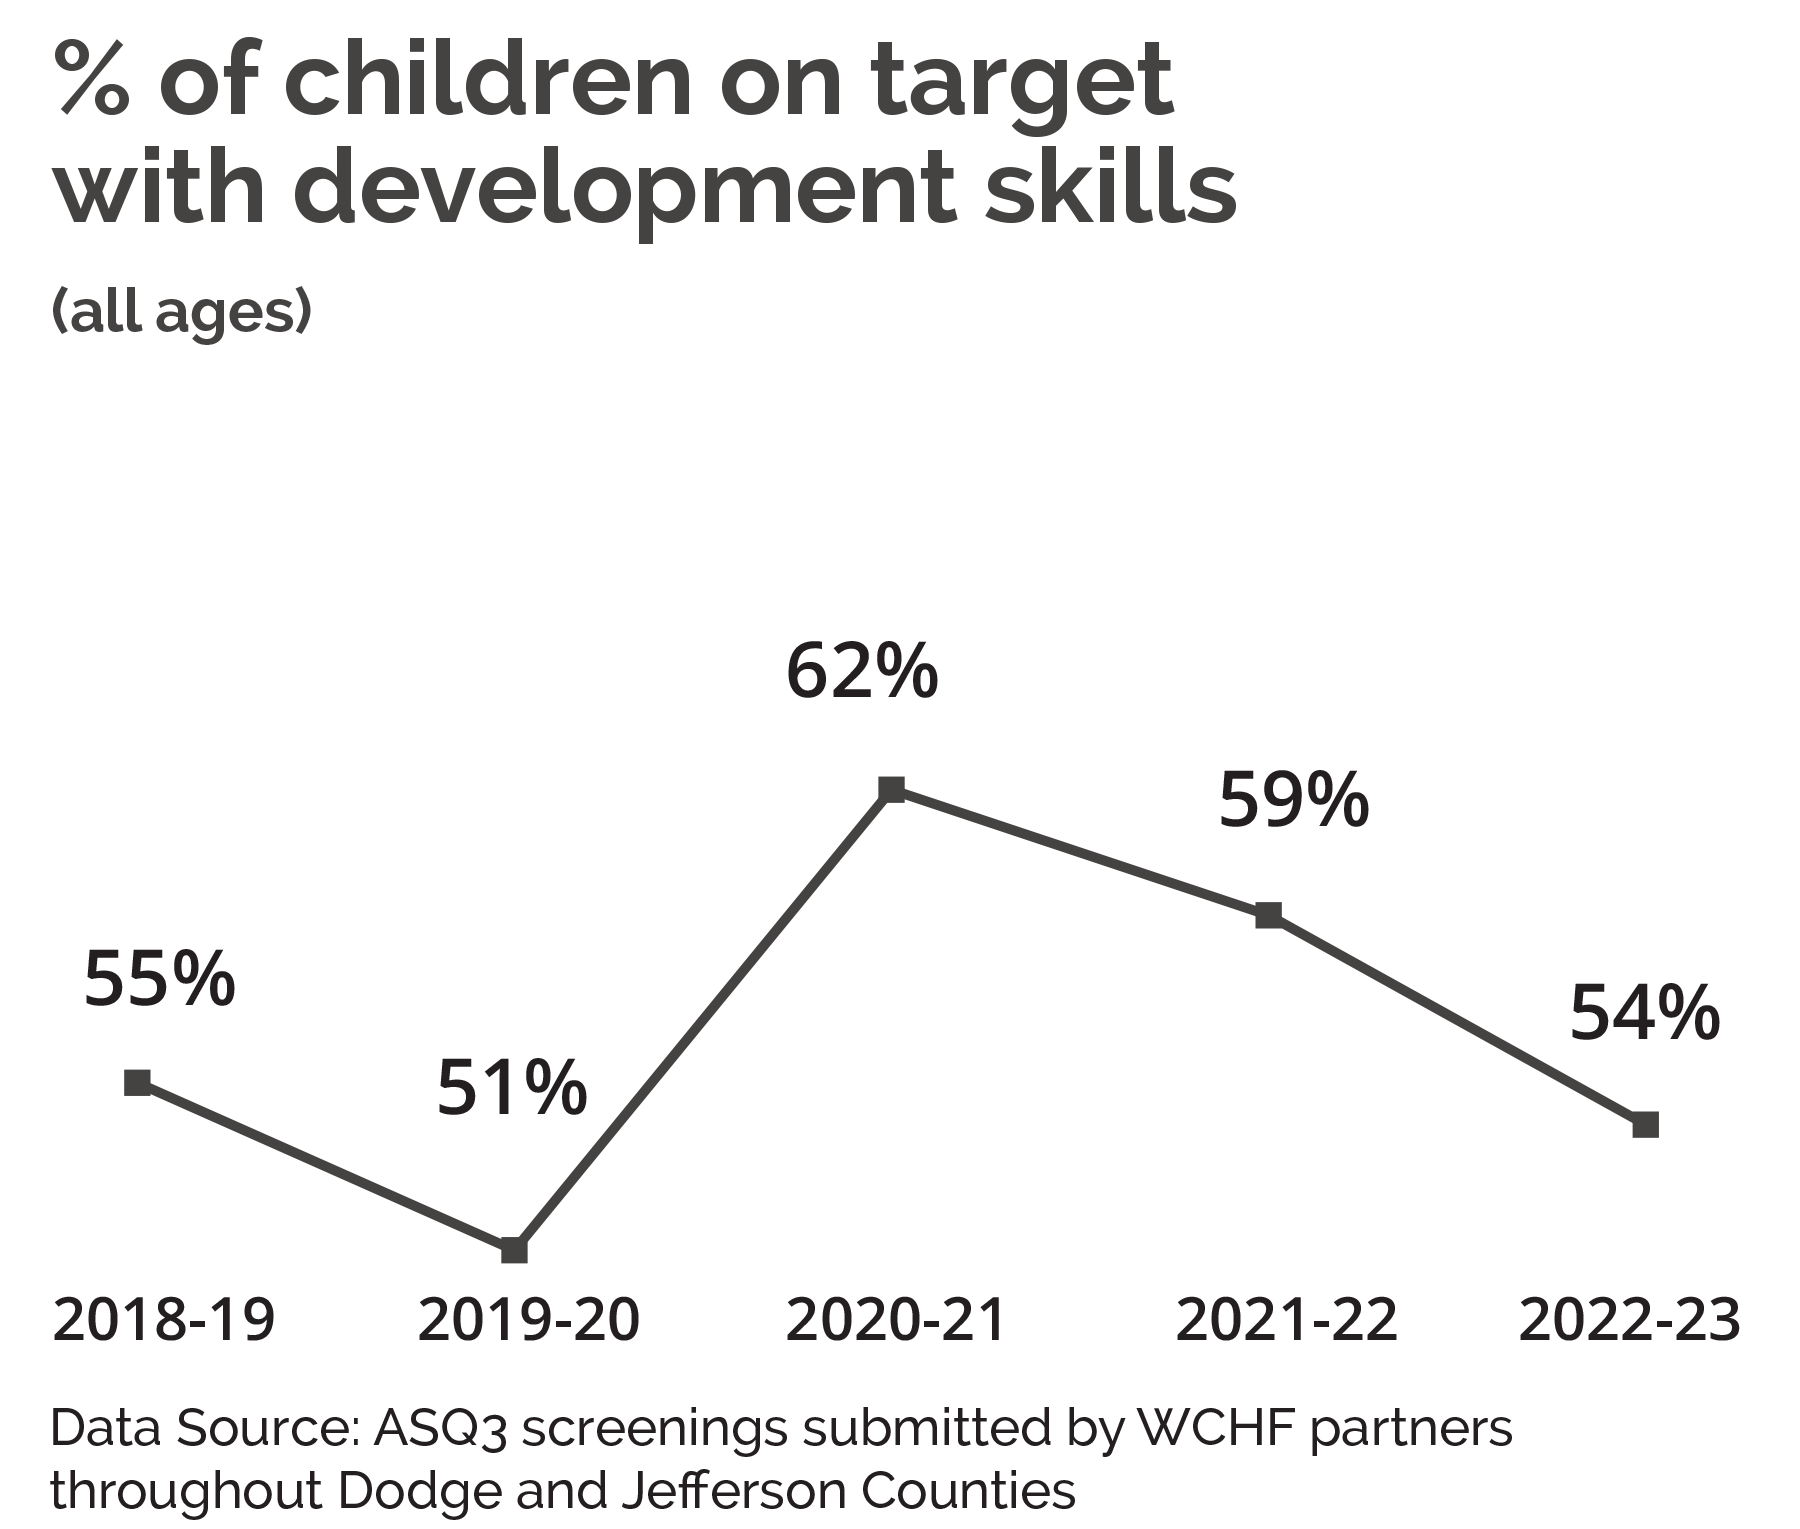 Better off:  % of children on target with developmental skills (all ages)
